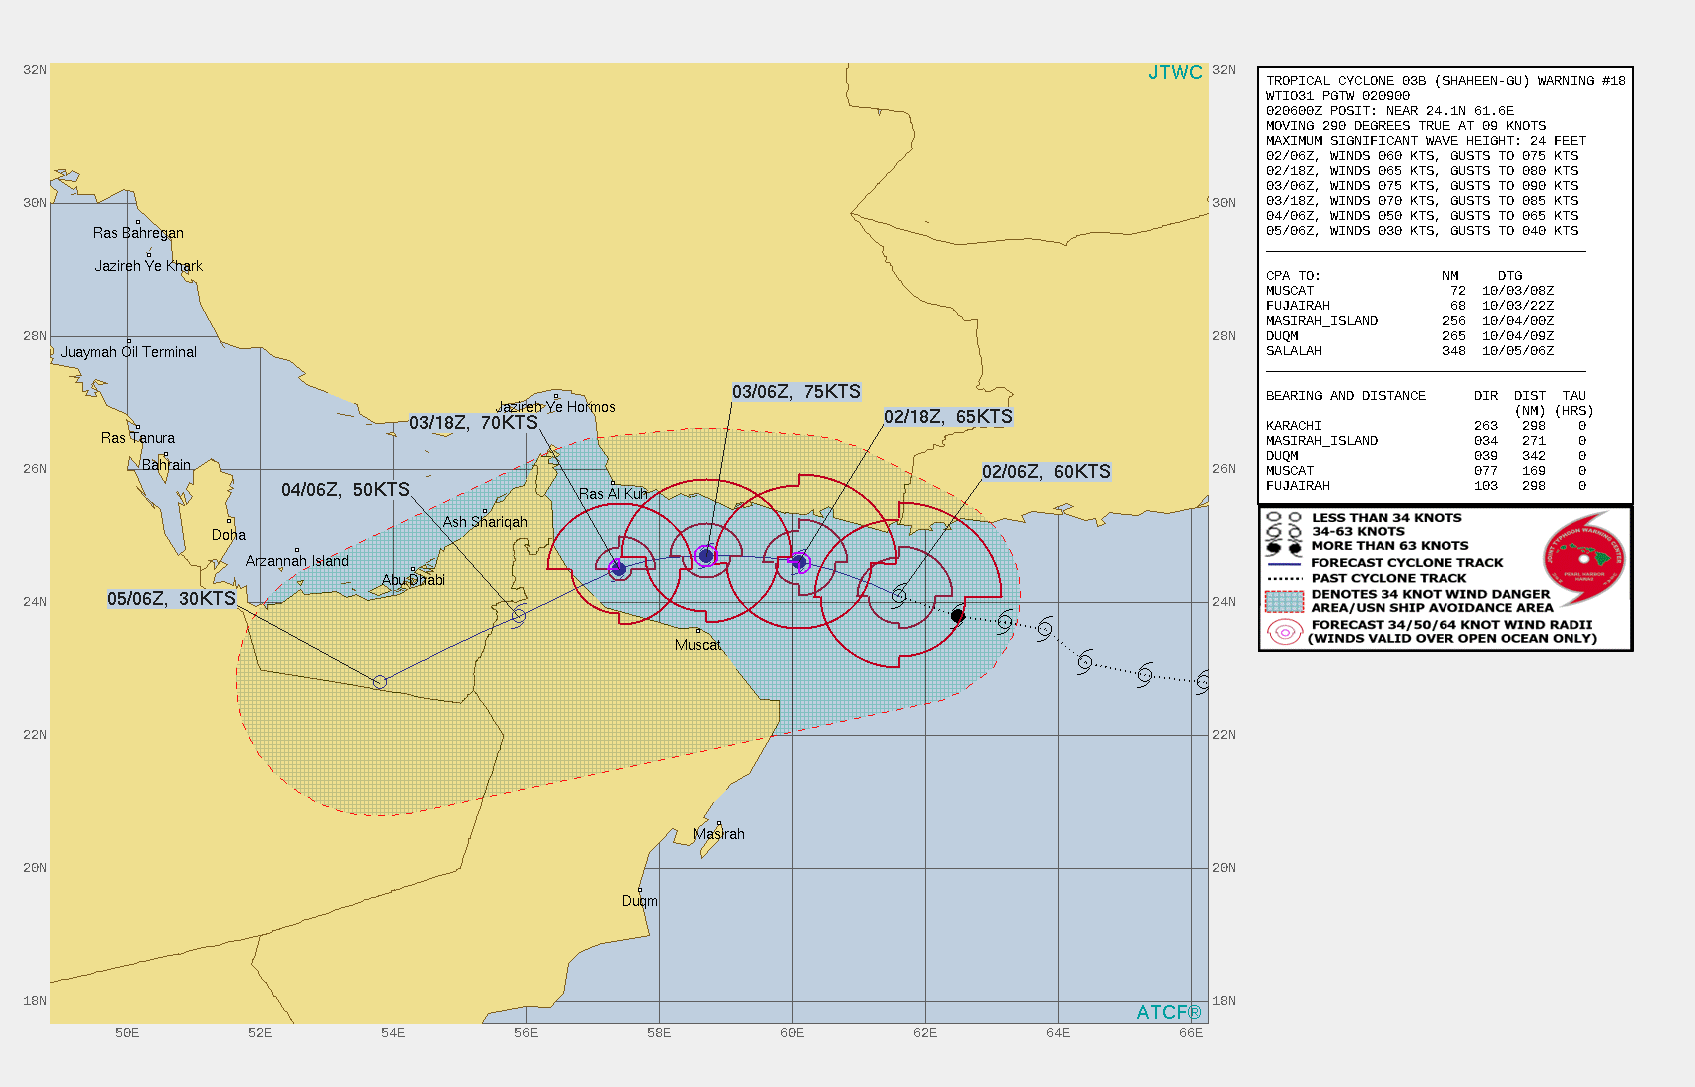 FORECAST REASONING.  SIGNIFICANT FORECAST CHANGES: THERE ARE NO SIGNIFICANT CHANGES TO THE FORECAST FROM THE PREVIOUS WARNING.   FORECAST DISCUSSION: TC 03B IS FORECAST TO CONTINUE TRACKING GENERALLY WEST-NORTHWESTWARD OVER THE NEXT 12 HOURS, THEN TURN WEST AND ULTIMATELY SOUTHWEST 36H. THE SYSTEM IS EXPECTED TO MAKE LANDFALL ALONG THE EASTERN COAST OF OMAN, NEAR SOHAR. OVER THE PAST SIX HOURS, TC 03B HAS STRUGGLED TO MAINTAIN AN EYE DUE TO A BURST OF STRONGER NORTHERLY UPPER-LEVEL SHEAR WHICH EXPOSED THE NORTHERN HALF OF THE LOW-LEVEL CIRCULATION. THIS TREND IS ALREADY WEAKENING AND HWRF SYNTHETIC SOUNDINGS INDICATE MAXIMUM SHEAR IN THE 200-300MB LEVEL ARE NOW DOWN TO 10-17 KNOTS. THE REAPPEARANCE OF THE EYE OVER THE PAST HOUR SUPPORTS THIS ANALYSIS. LIKEWISE, CIMSS AUTOMATED SHEAR ESTIMATES ARE TOO HIGH BASED ON HAND ANALYSIS OF THE UPPER-LEVEL WINDS. THE DEEP-LAYER AVERAGE SHEAR VECTOR IS FROM THE EAST AT ABOUT 10 KNOTS, AND THE SYSTEM IS SO FAR SUCCESSFULLY PUSHING BACK AGAINST THE SHEAR, AS EVIDENCED BY THE PRESENCE OF A BAND OF HIGH LEVEL MOISTURE WELL OUT TO THE EAST OF THE CORE. A VERY SMALL BUT FAIRLY STRONG UPPER-LEVEL POINT SOURCE HAS DEVELOPED OVER TOP OF THE SYSTEM, AND IS PROVIDING MODERATE TO STRONG DUAL-CHANNEL OUTFLOW ALOFT. ADDITIONALLY INCREASE TO THE WEST, ALONG THE SYSTEMS PATH, TO 30-31C BY THE TIME OF LANDFALL. LASTLY, AND SOMEWHAT SURPRISINGLY GIVEN THE SURROUNDING TERRAIN, ALL AVAILABLE DATA SUGGESTS THAT TC 03B IS SNUGGLY COCOONED WITHIN A POCKET OF DEEP MOISTURE, AND WHILE ENTRAINMENT OF SOME DRY AIR AND DUST IS TO BE EXPECTED, PARTICULARLY FROM THE NORTH, MODEL FIELDS SUGGEST THIS WILL HAVE LITTLE IMPACT SINCE IT WILL BE CONFINED TO A VERY SHALLOW LAYER NEAR THE SURFACE. ALL THAT TO SAY THAT THE SYSTEM IS EXPECTED TO INTENSIFY TO A PEAK OF 75 KNOTS/CAT 1 BY 24H. AFTER LANDFALL, THE SYSTEM WILL RAPIDLY WEAKEN AND ULTIMATELY DISSIPATE OVER THE EMPTY QUARTER REGION.